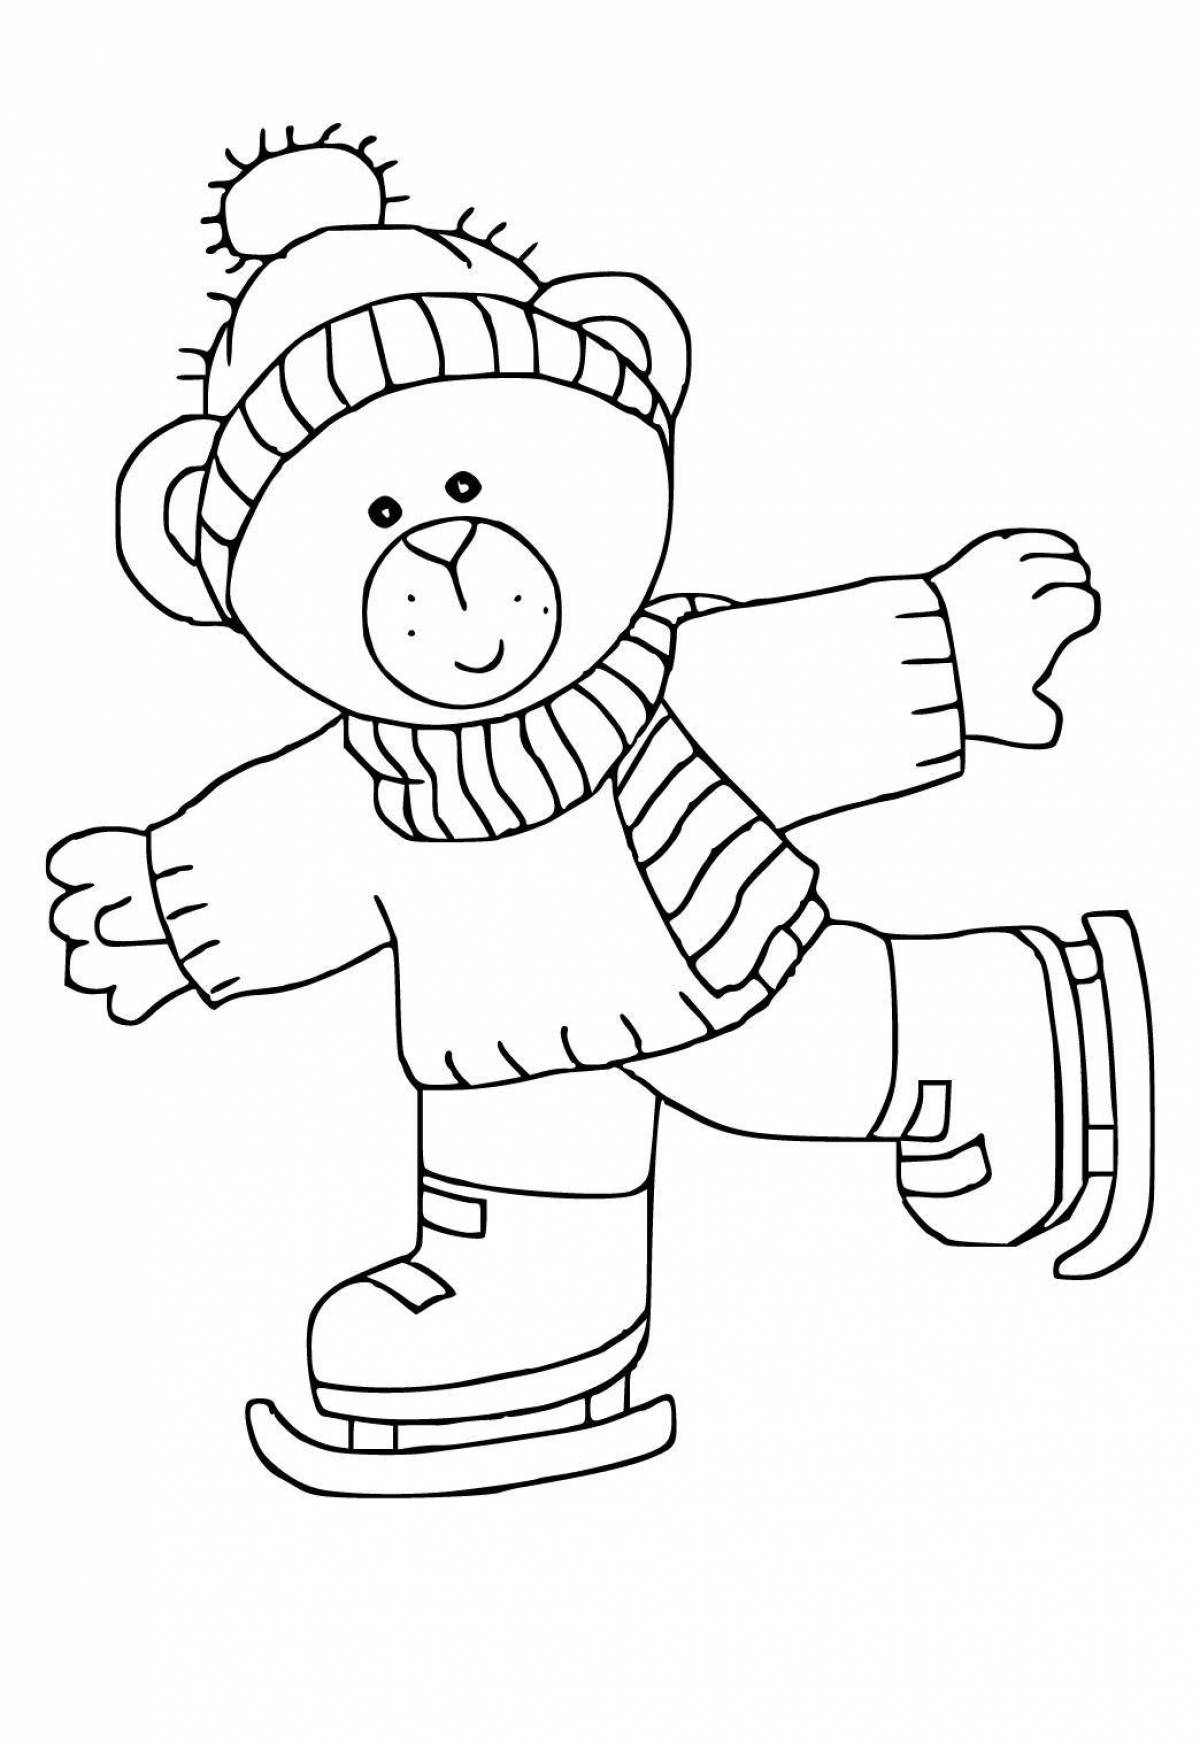 Adorable winter coloring book for children 2-3 years old